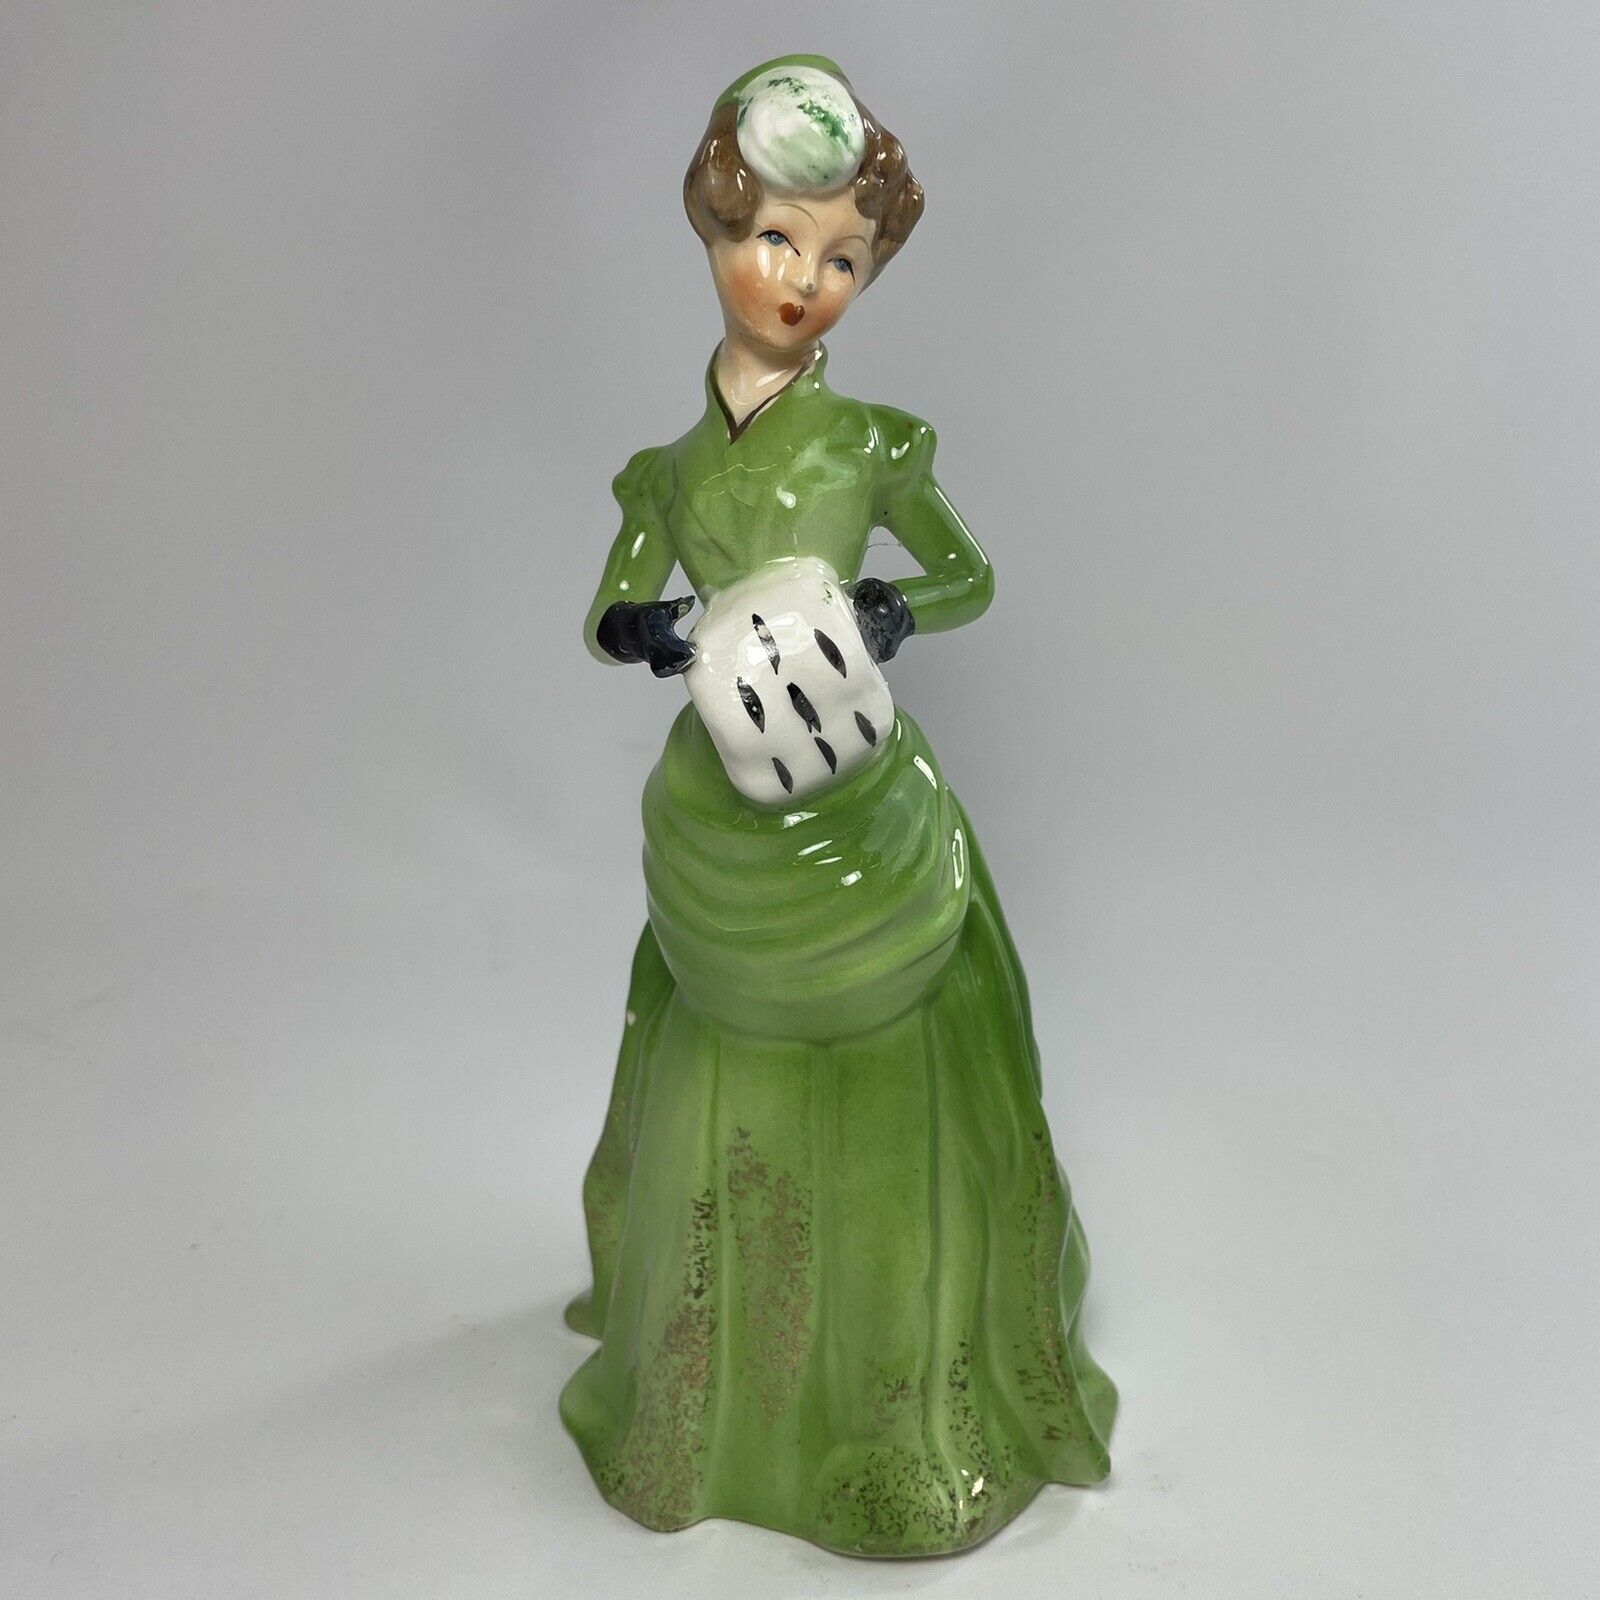 Vintage Victorian Lady Figurine Statue in Green Dress  As Is SEE